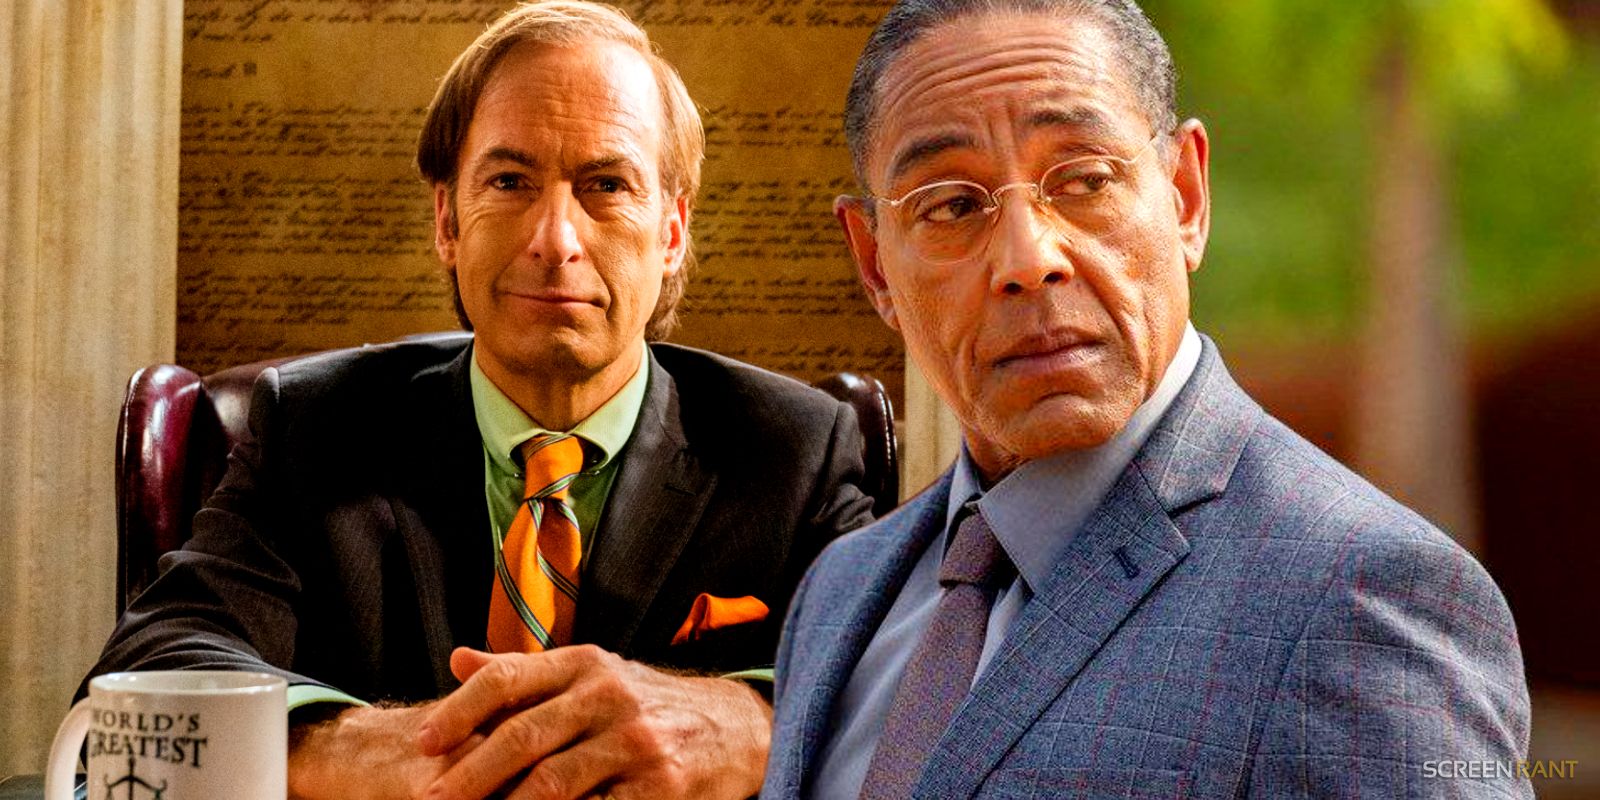 Bob Odenkirk as Saul Goodman and Giancarlo Esposito as Gus Fring in in Better Call Saul